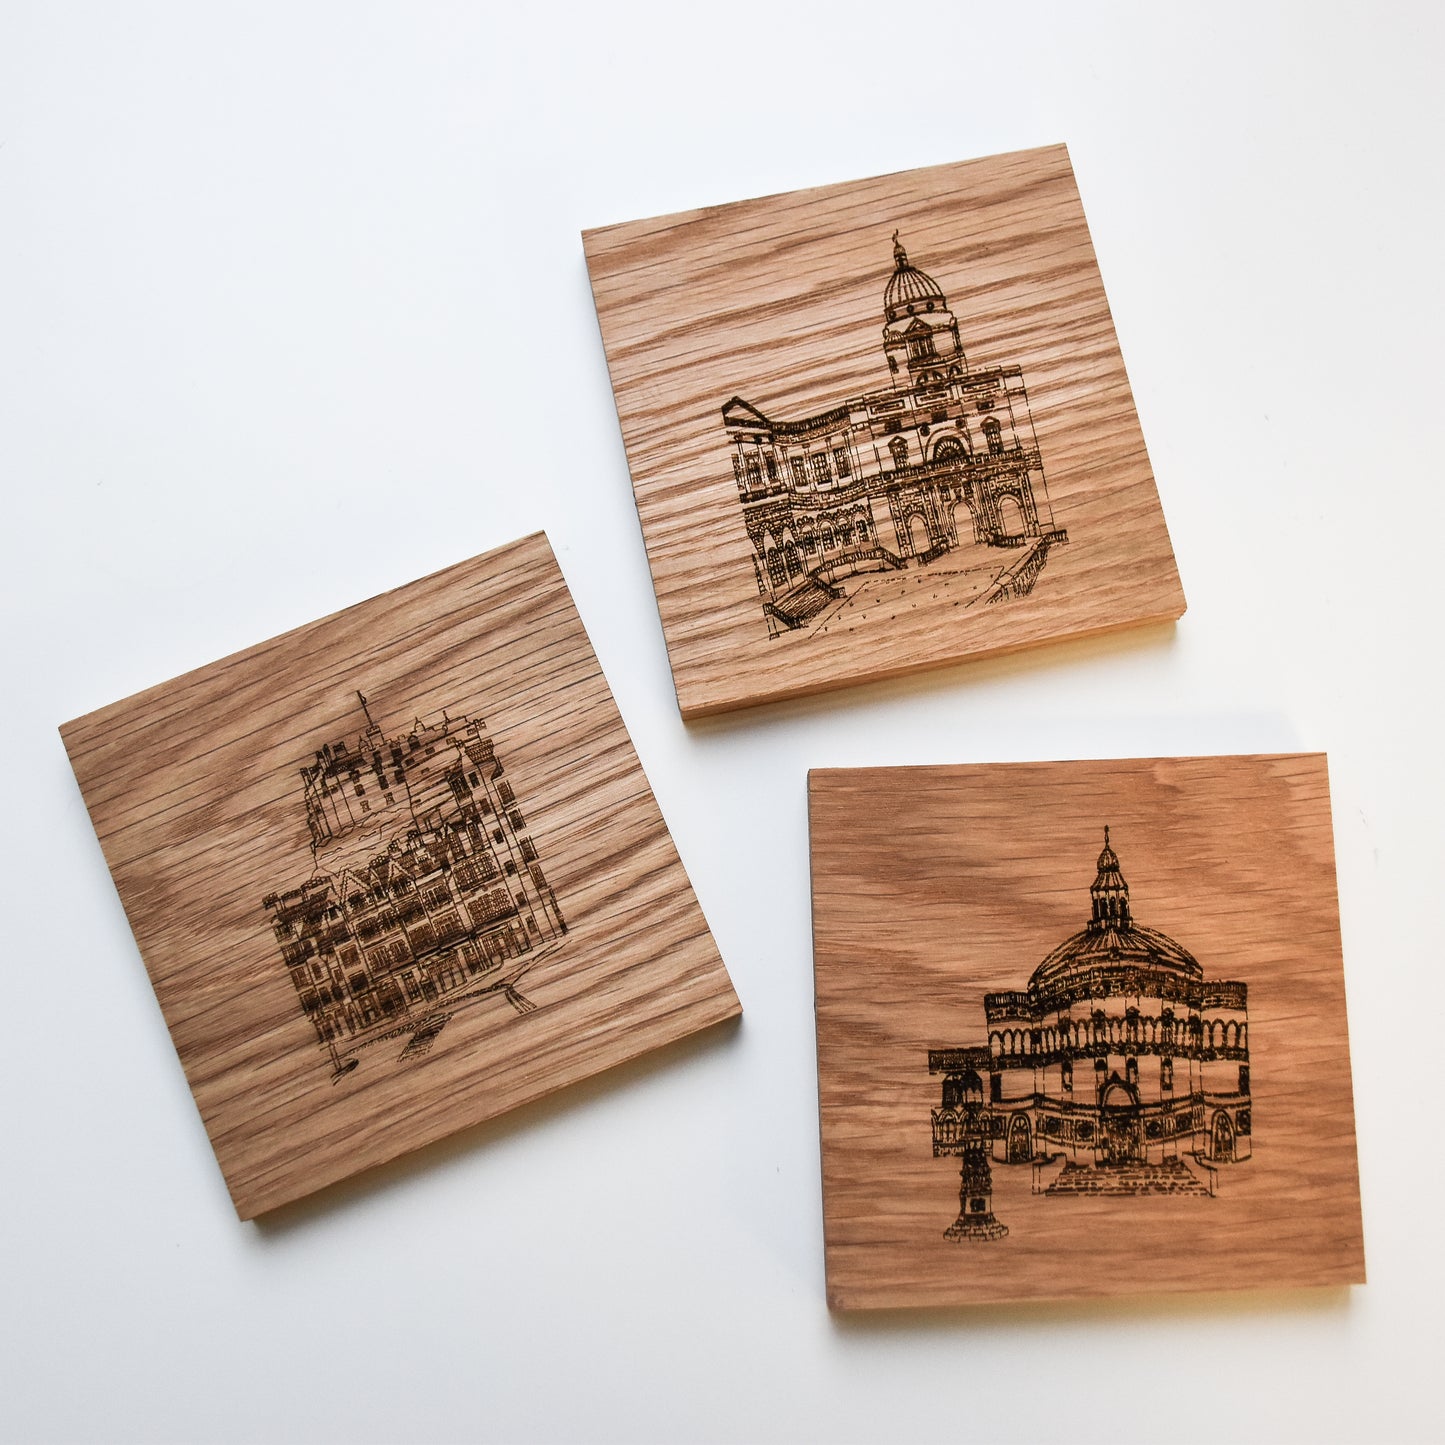 Wooden coasters featuring engraved illustrations of Old College, the Castle & Mcewan Hall 